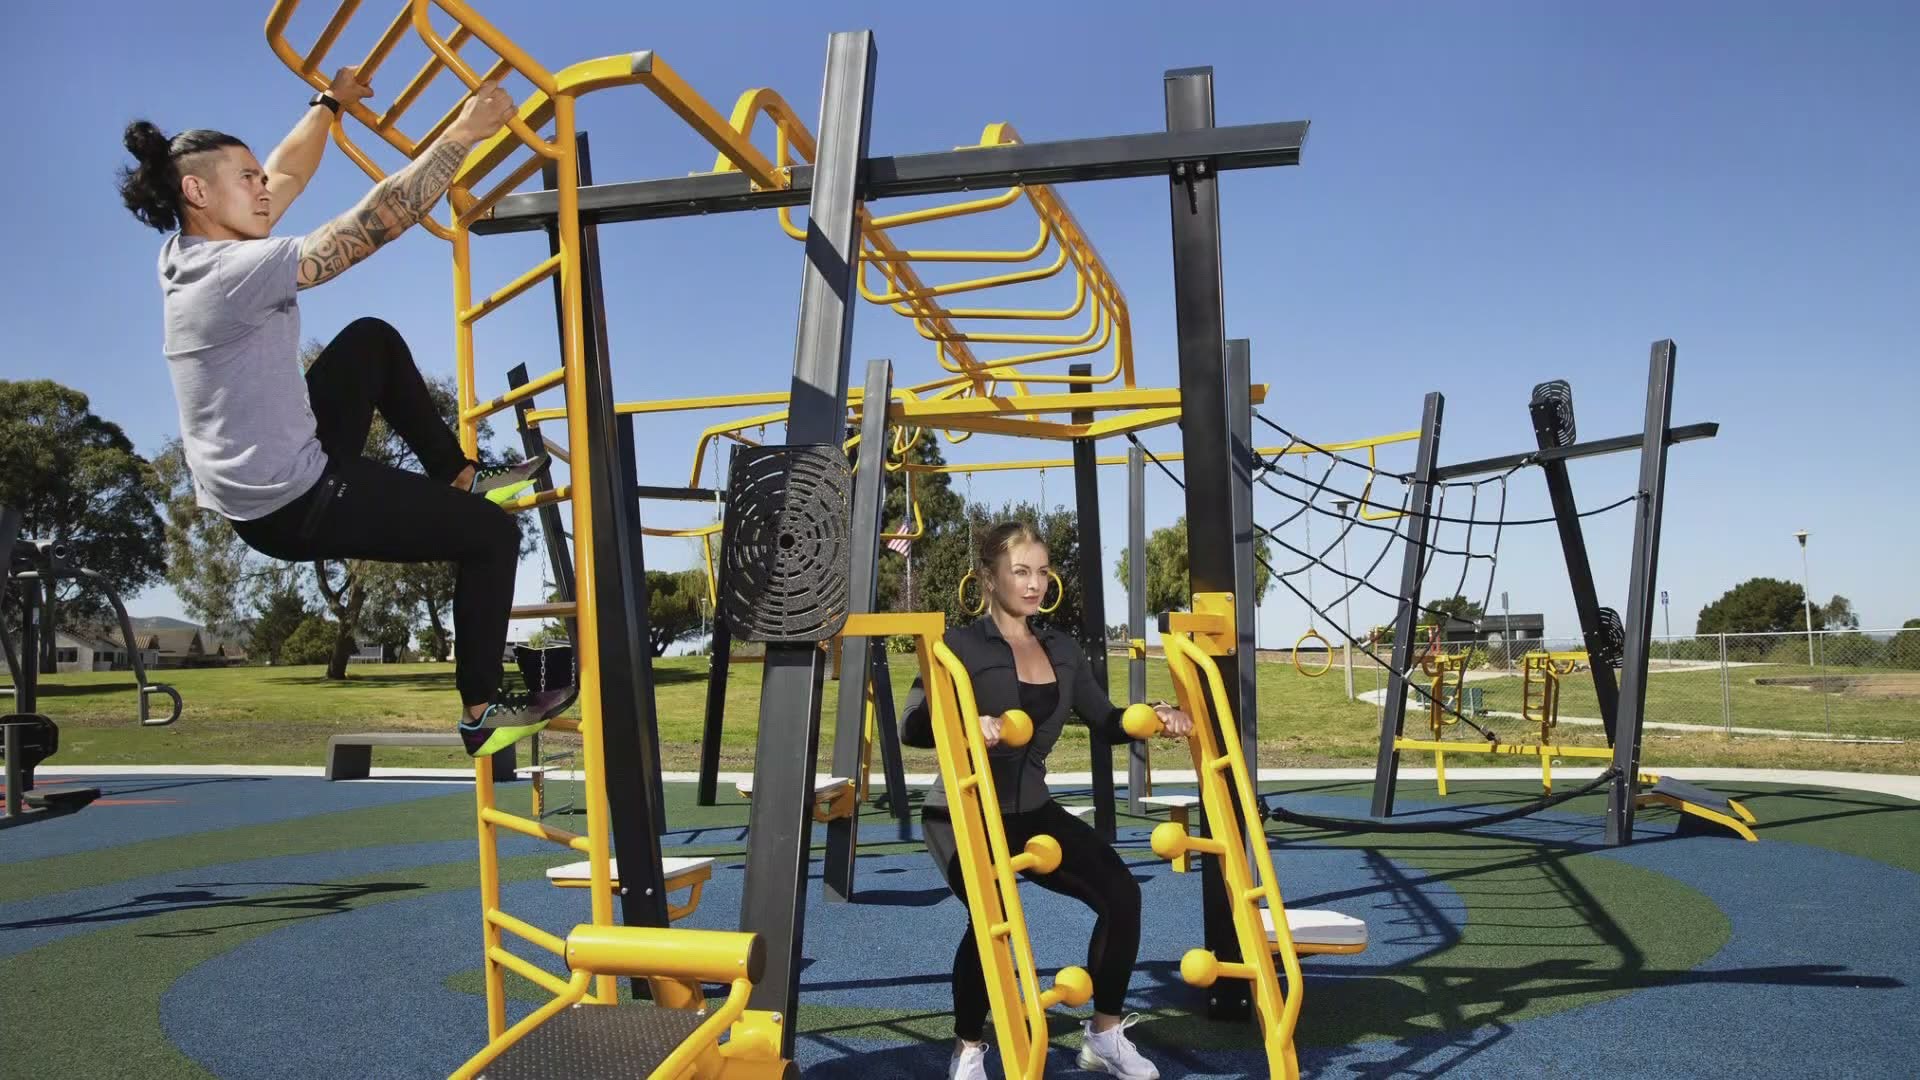 The city of Brewer announced a healthy addition to its Riverwalk... A new outdoor gym at Veteran's Park that will be installed by the fourth of July.